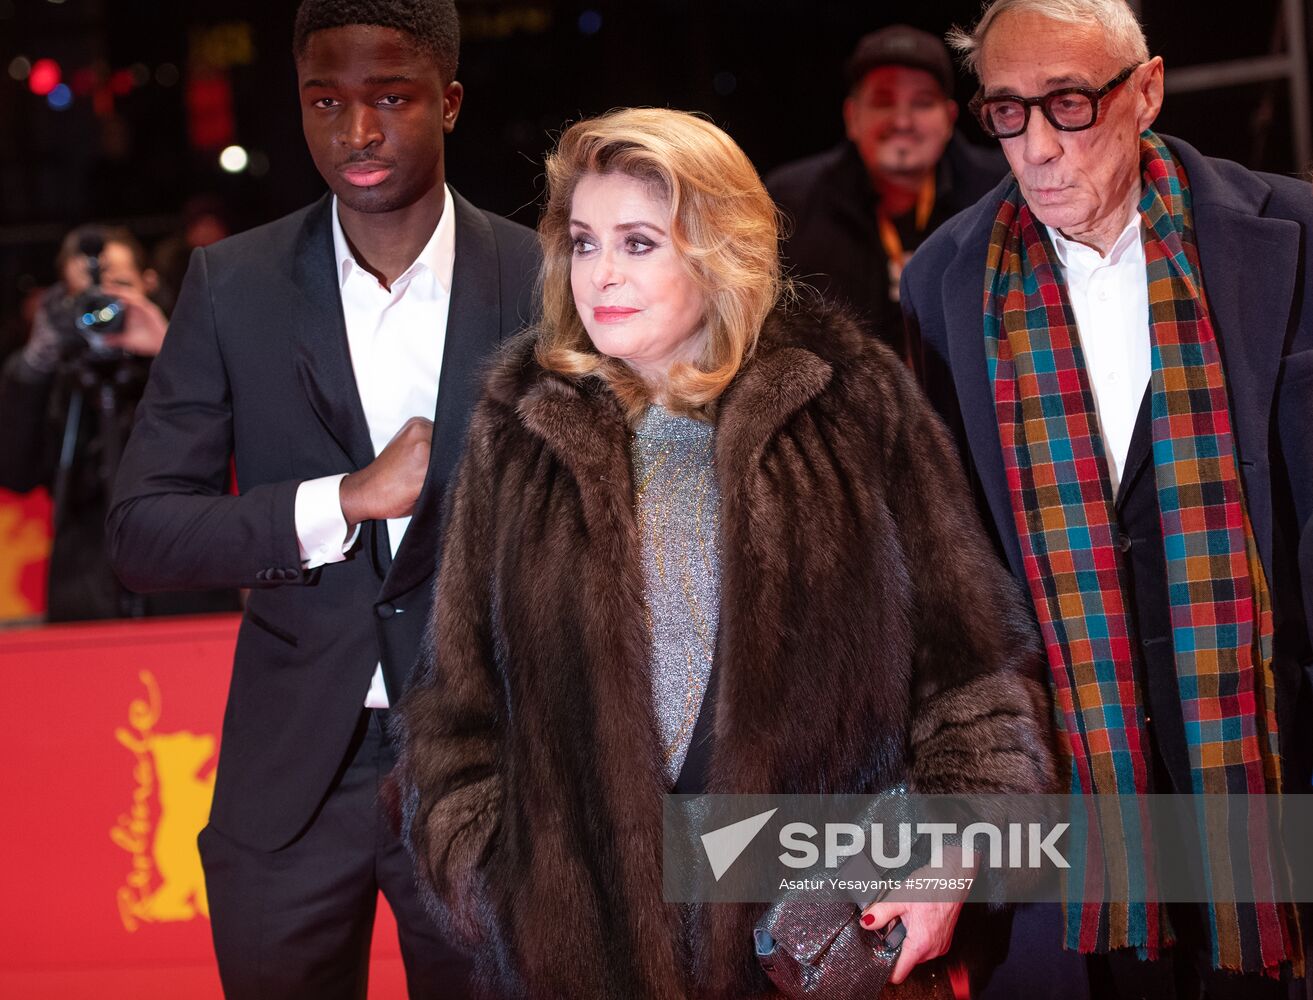 Germany Berlinale Farewell To The Night Movie